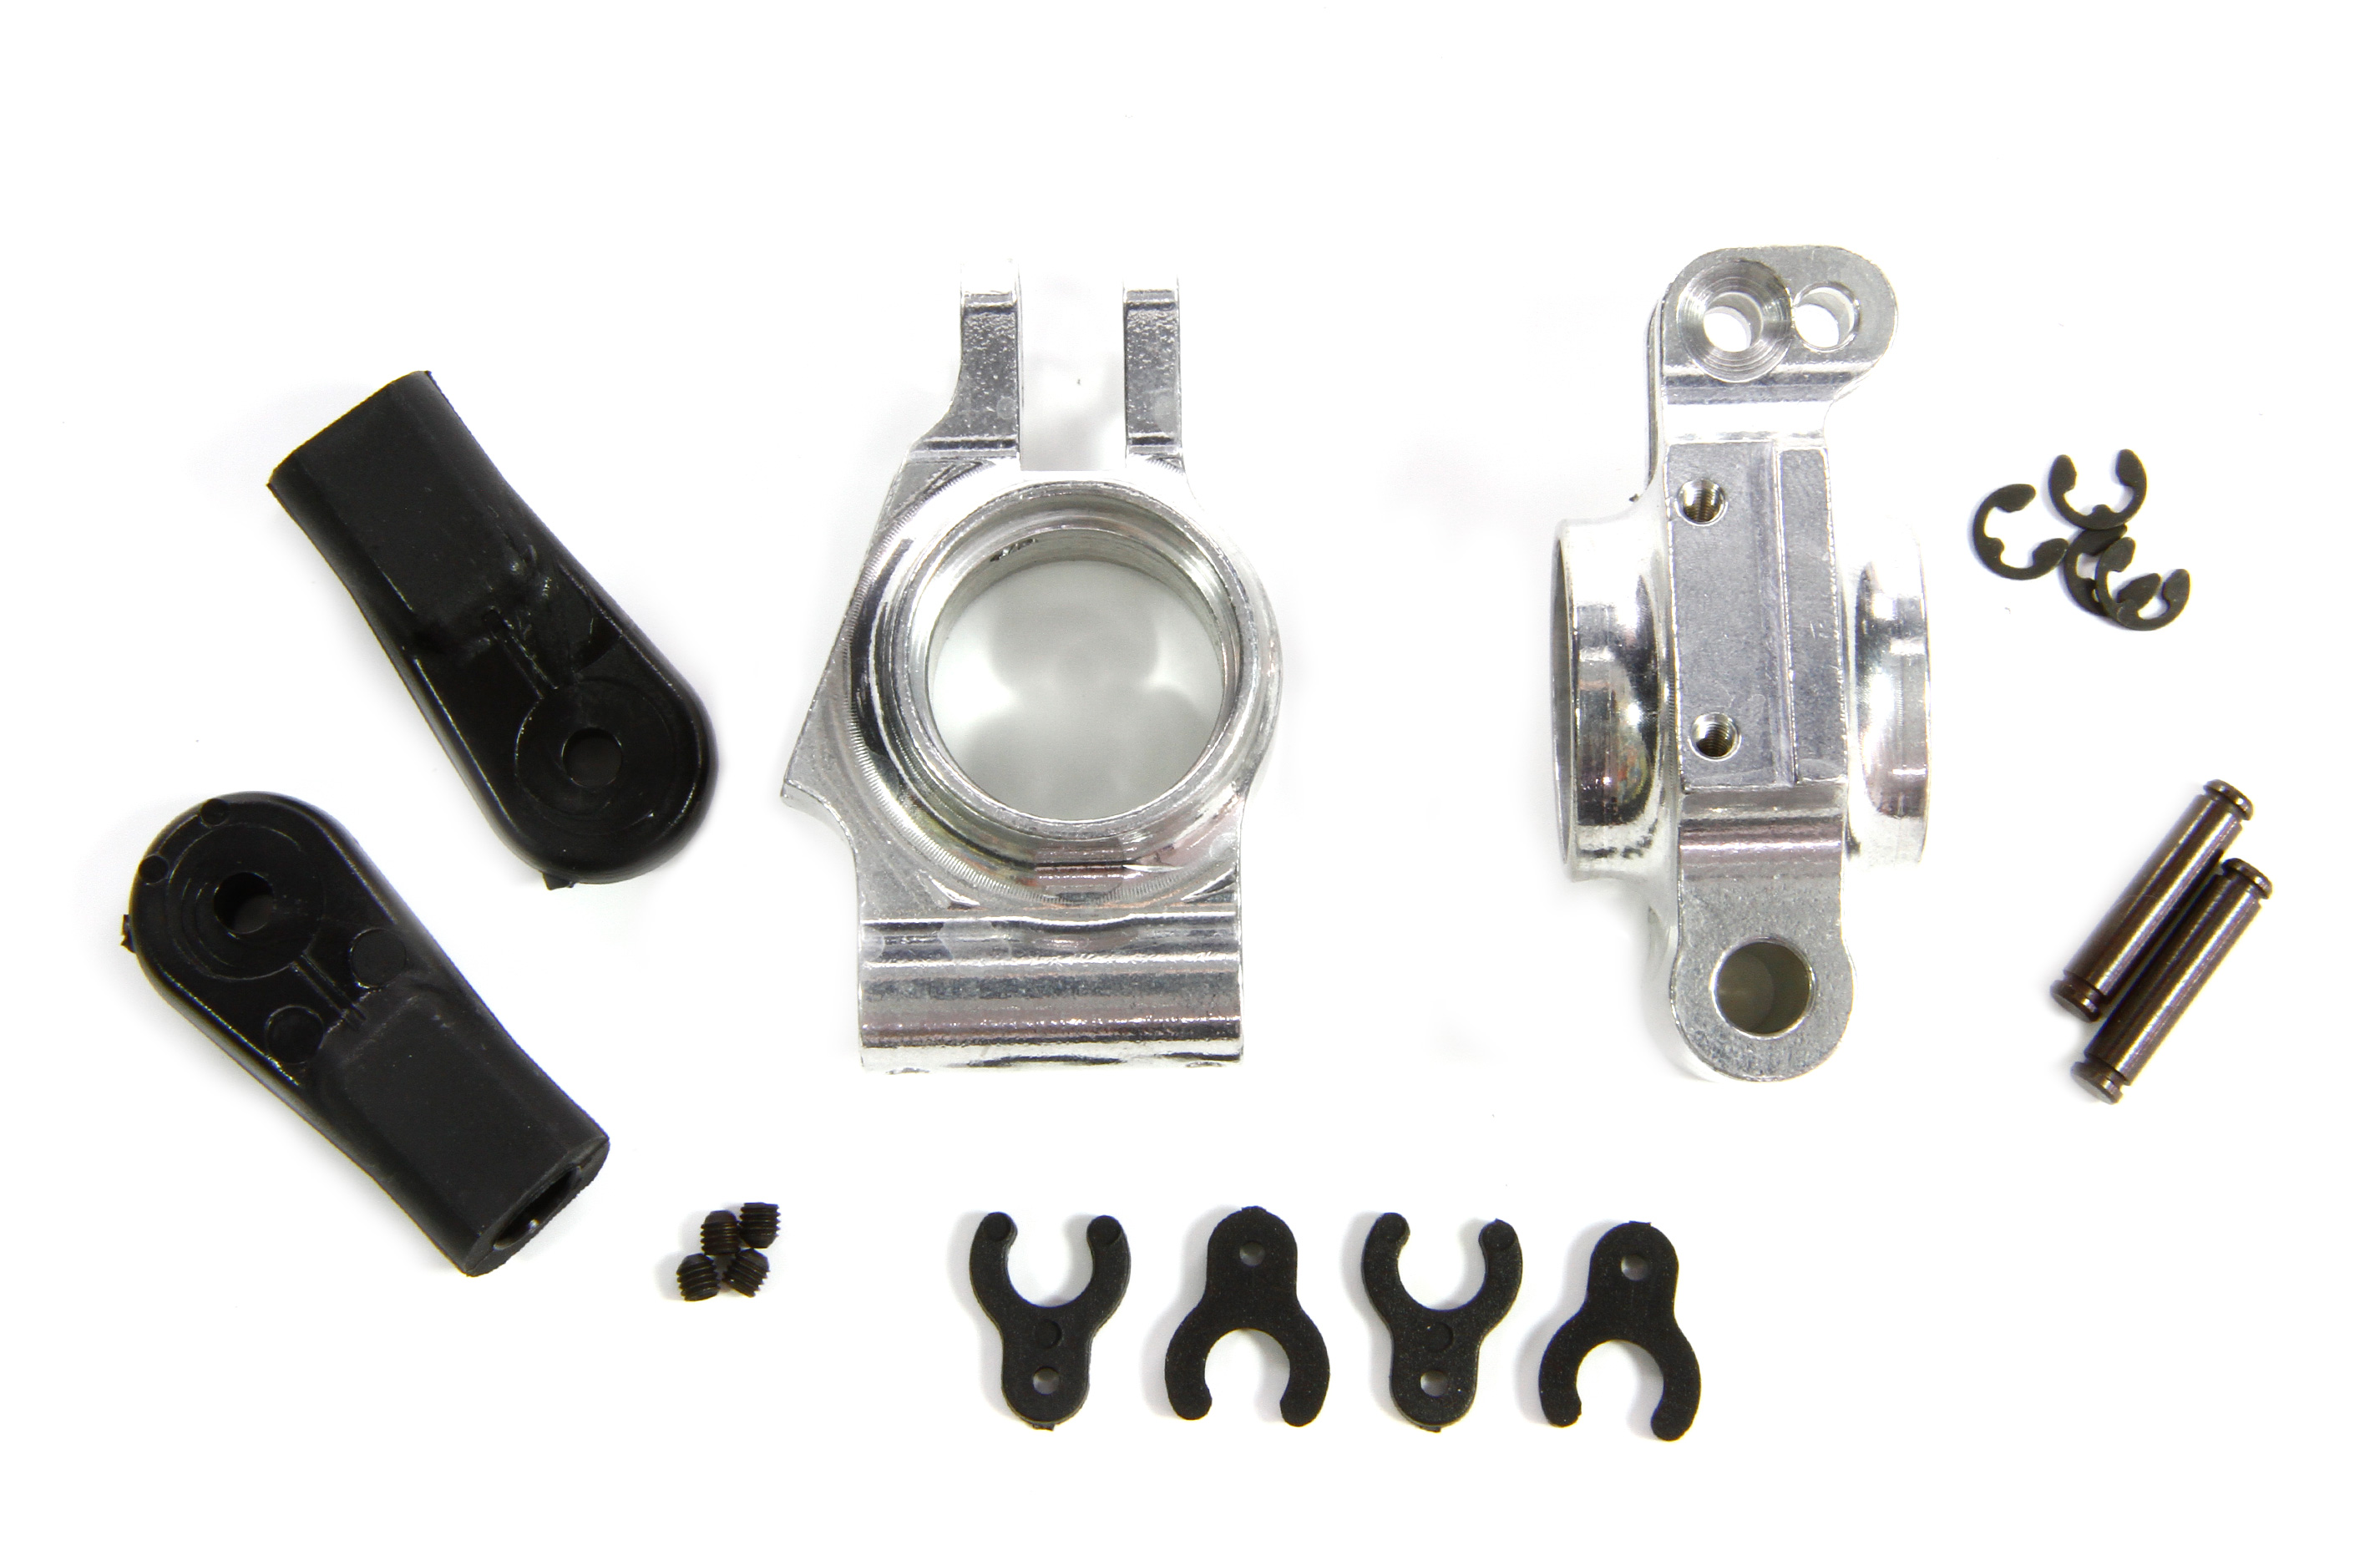 6477 FG Rear alloy upright for 1:5 and 1:6 models